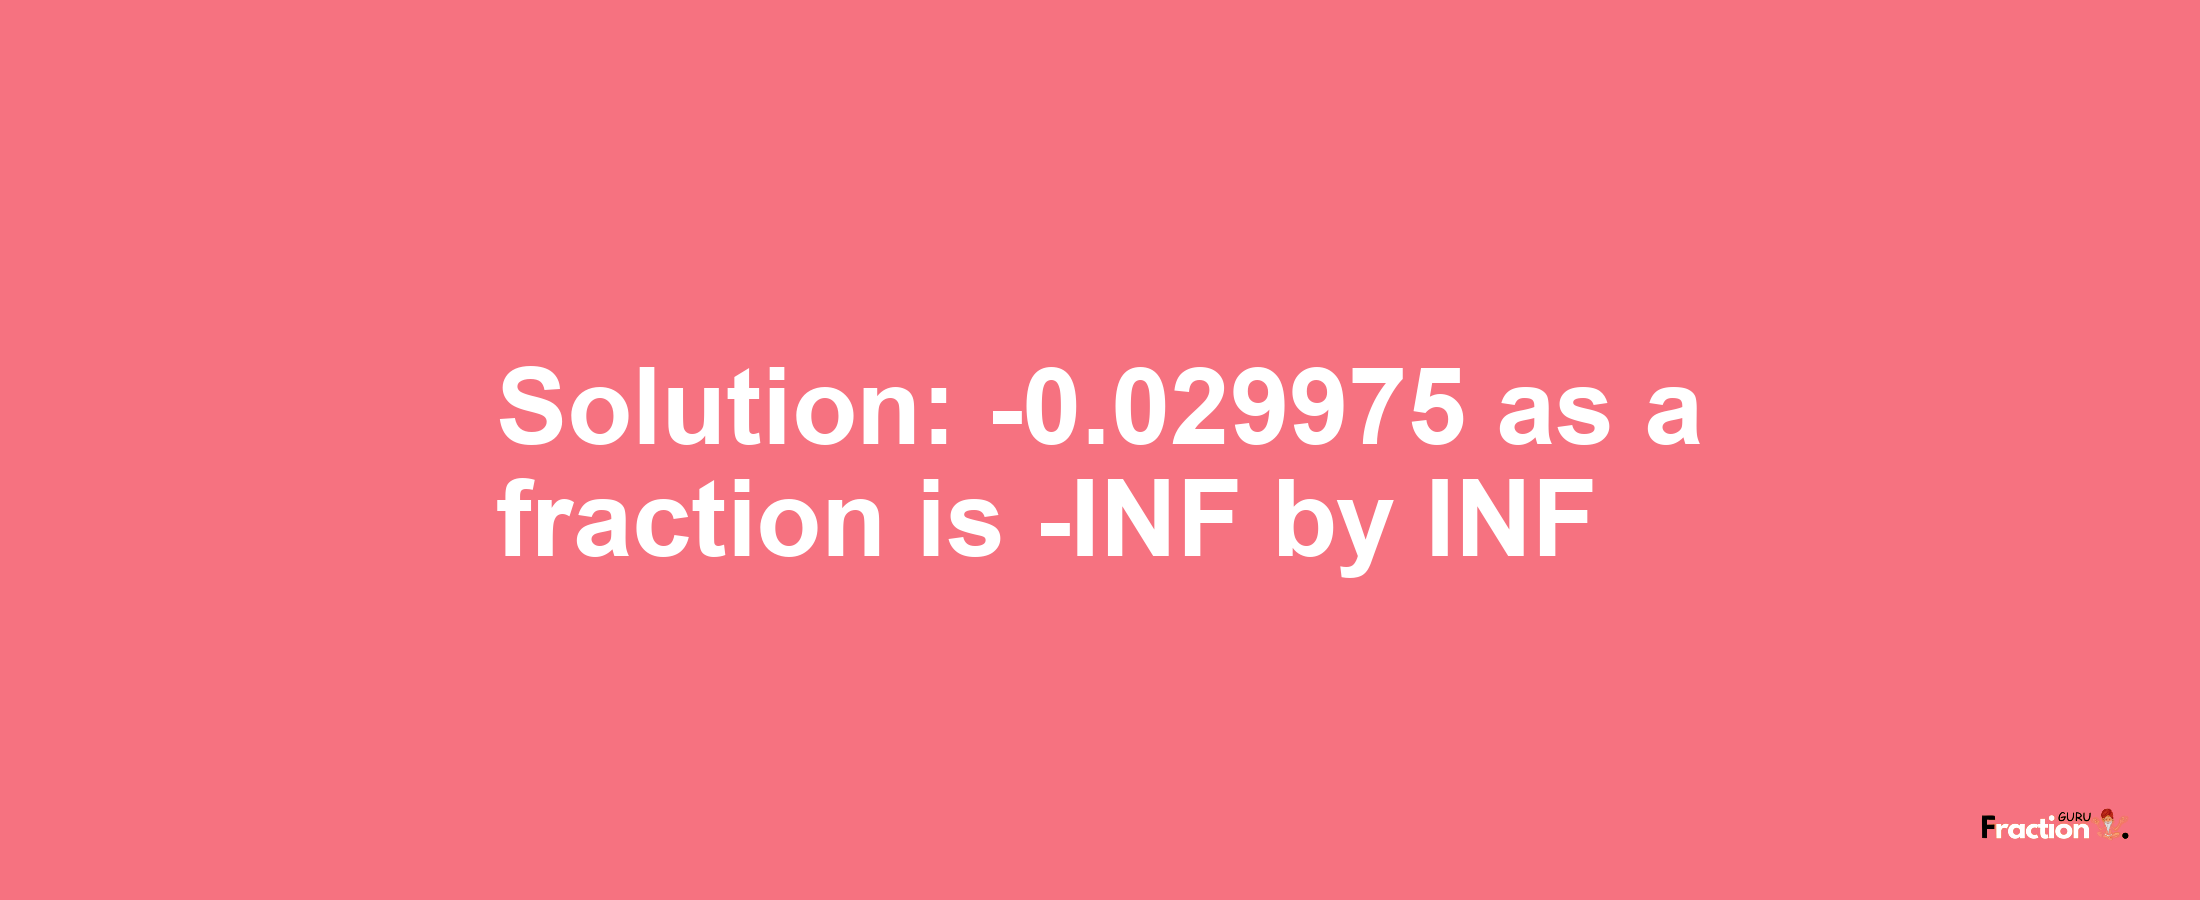 Solution:-0.029975 as a fraction is -INF/INF